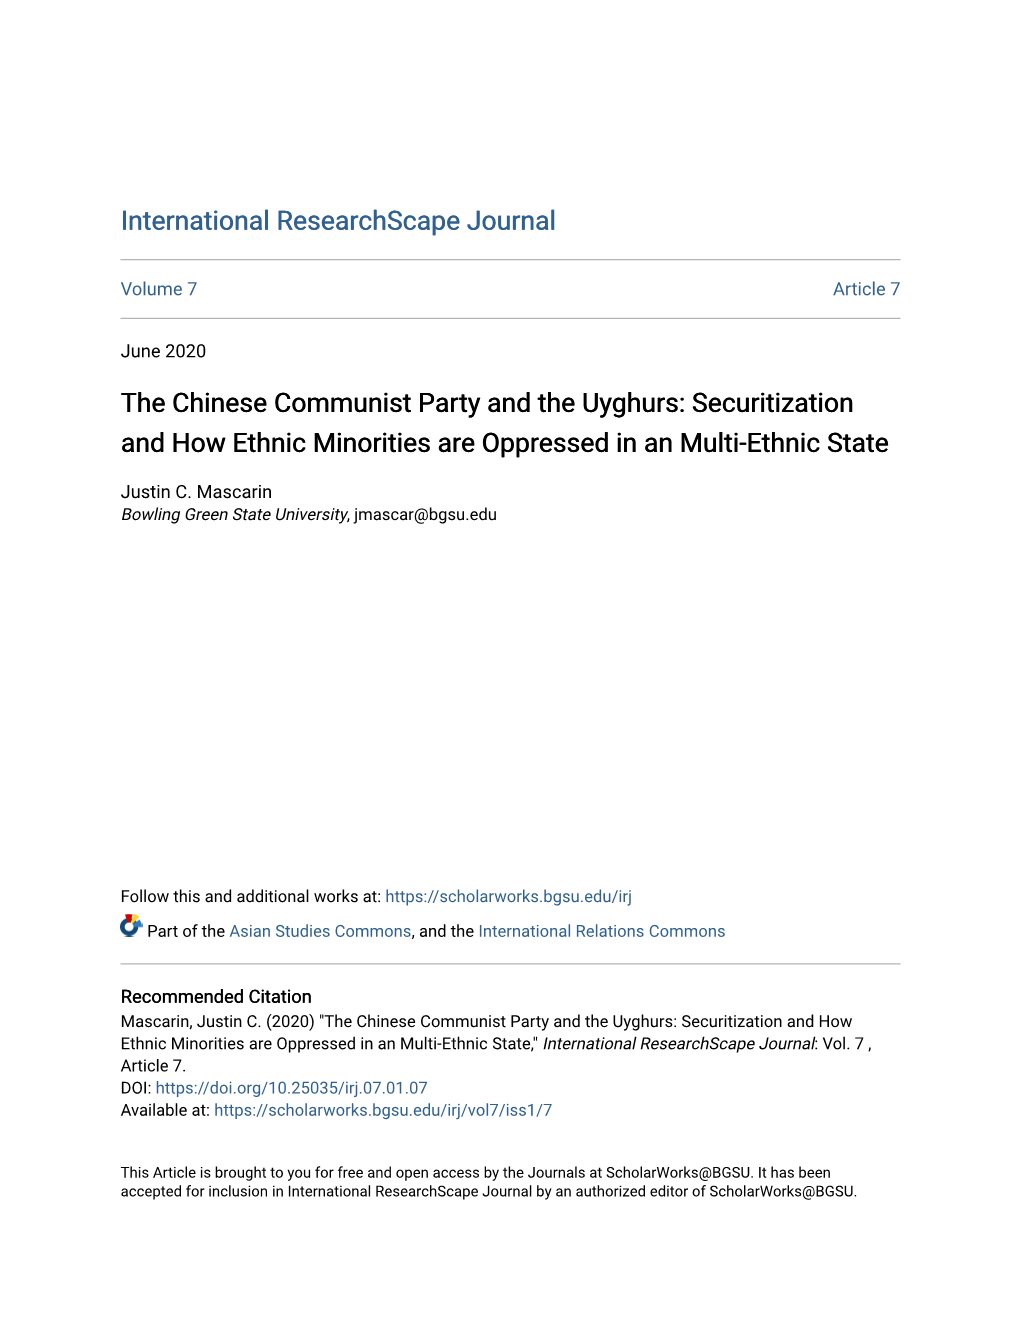 The Chinese Communist Party and the Uyghurs: Securitization and How Ethnic Minorities Are Oppressed in an Multi-Ethnic State